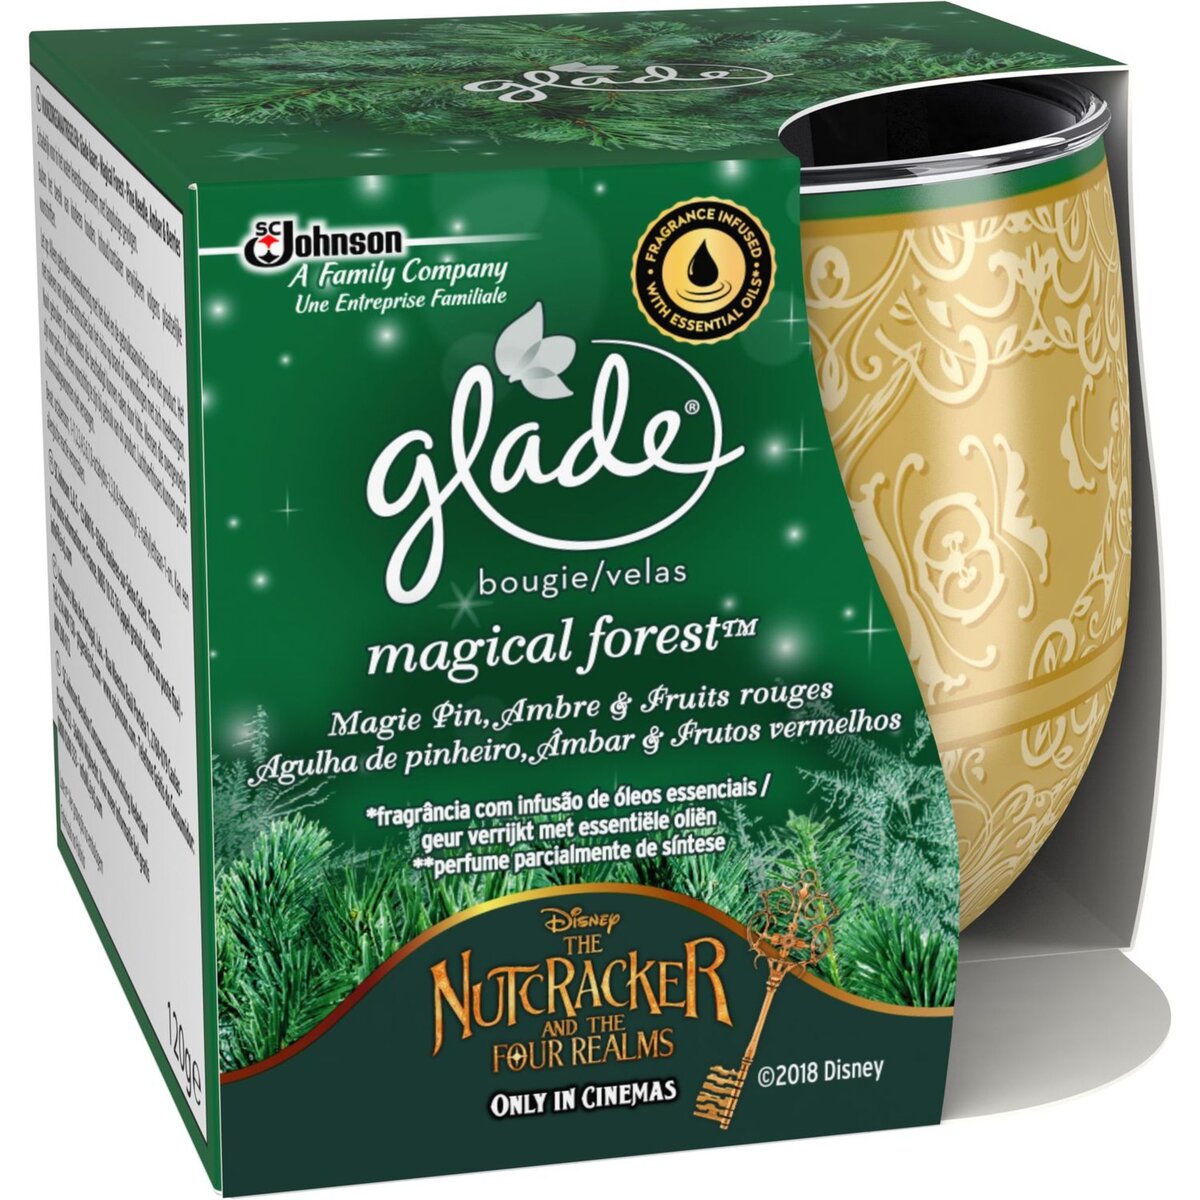 GLADE Glade bougie magical forest x1